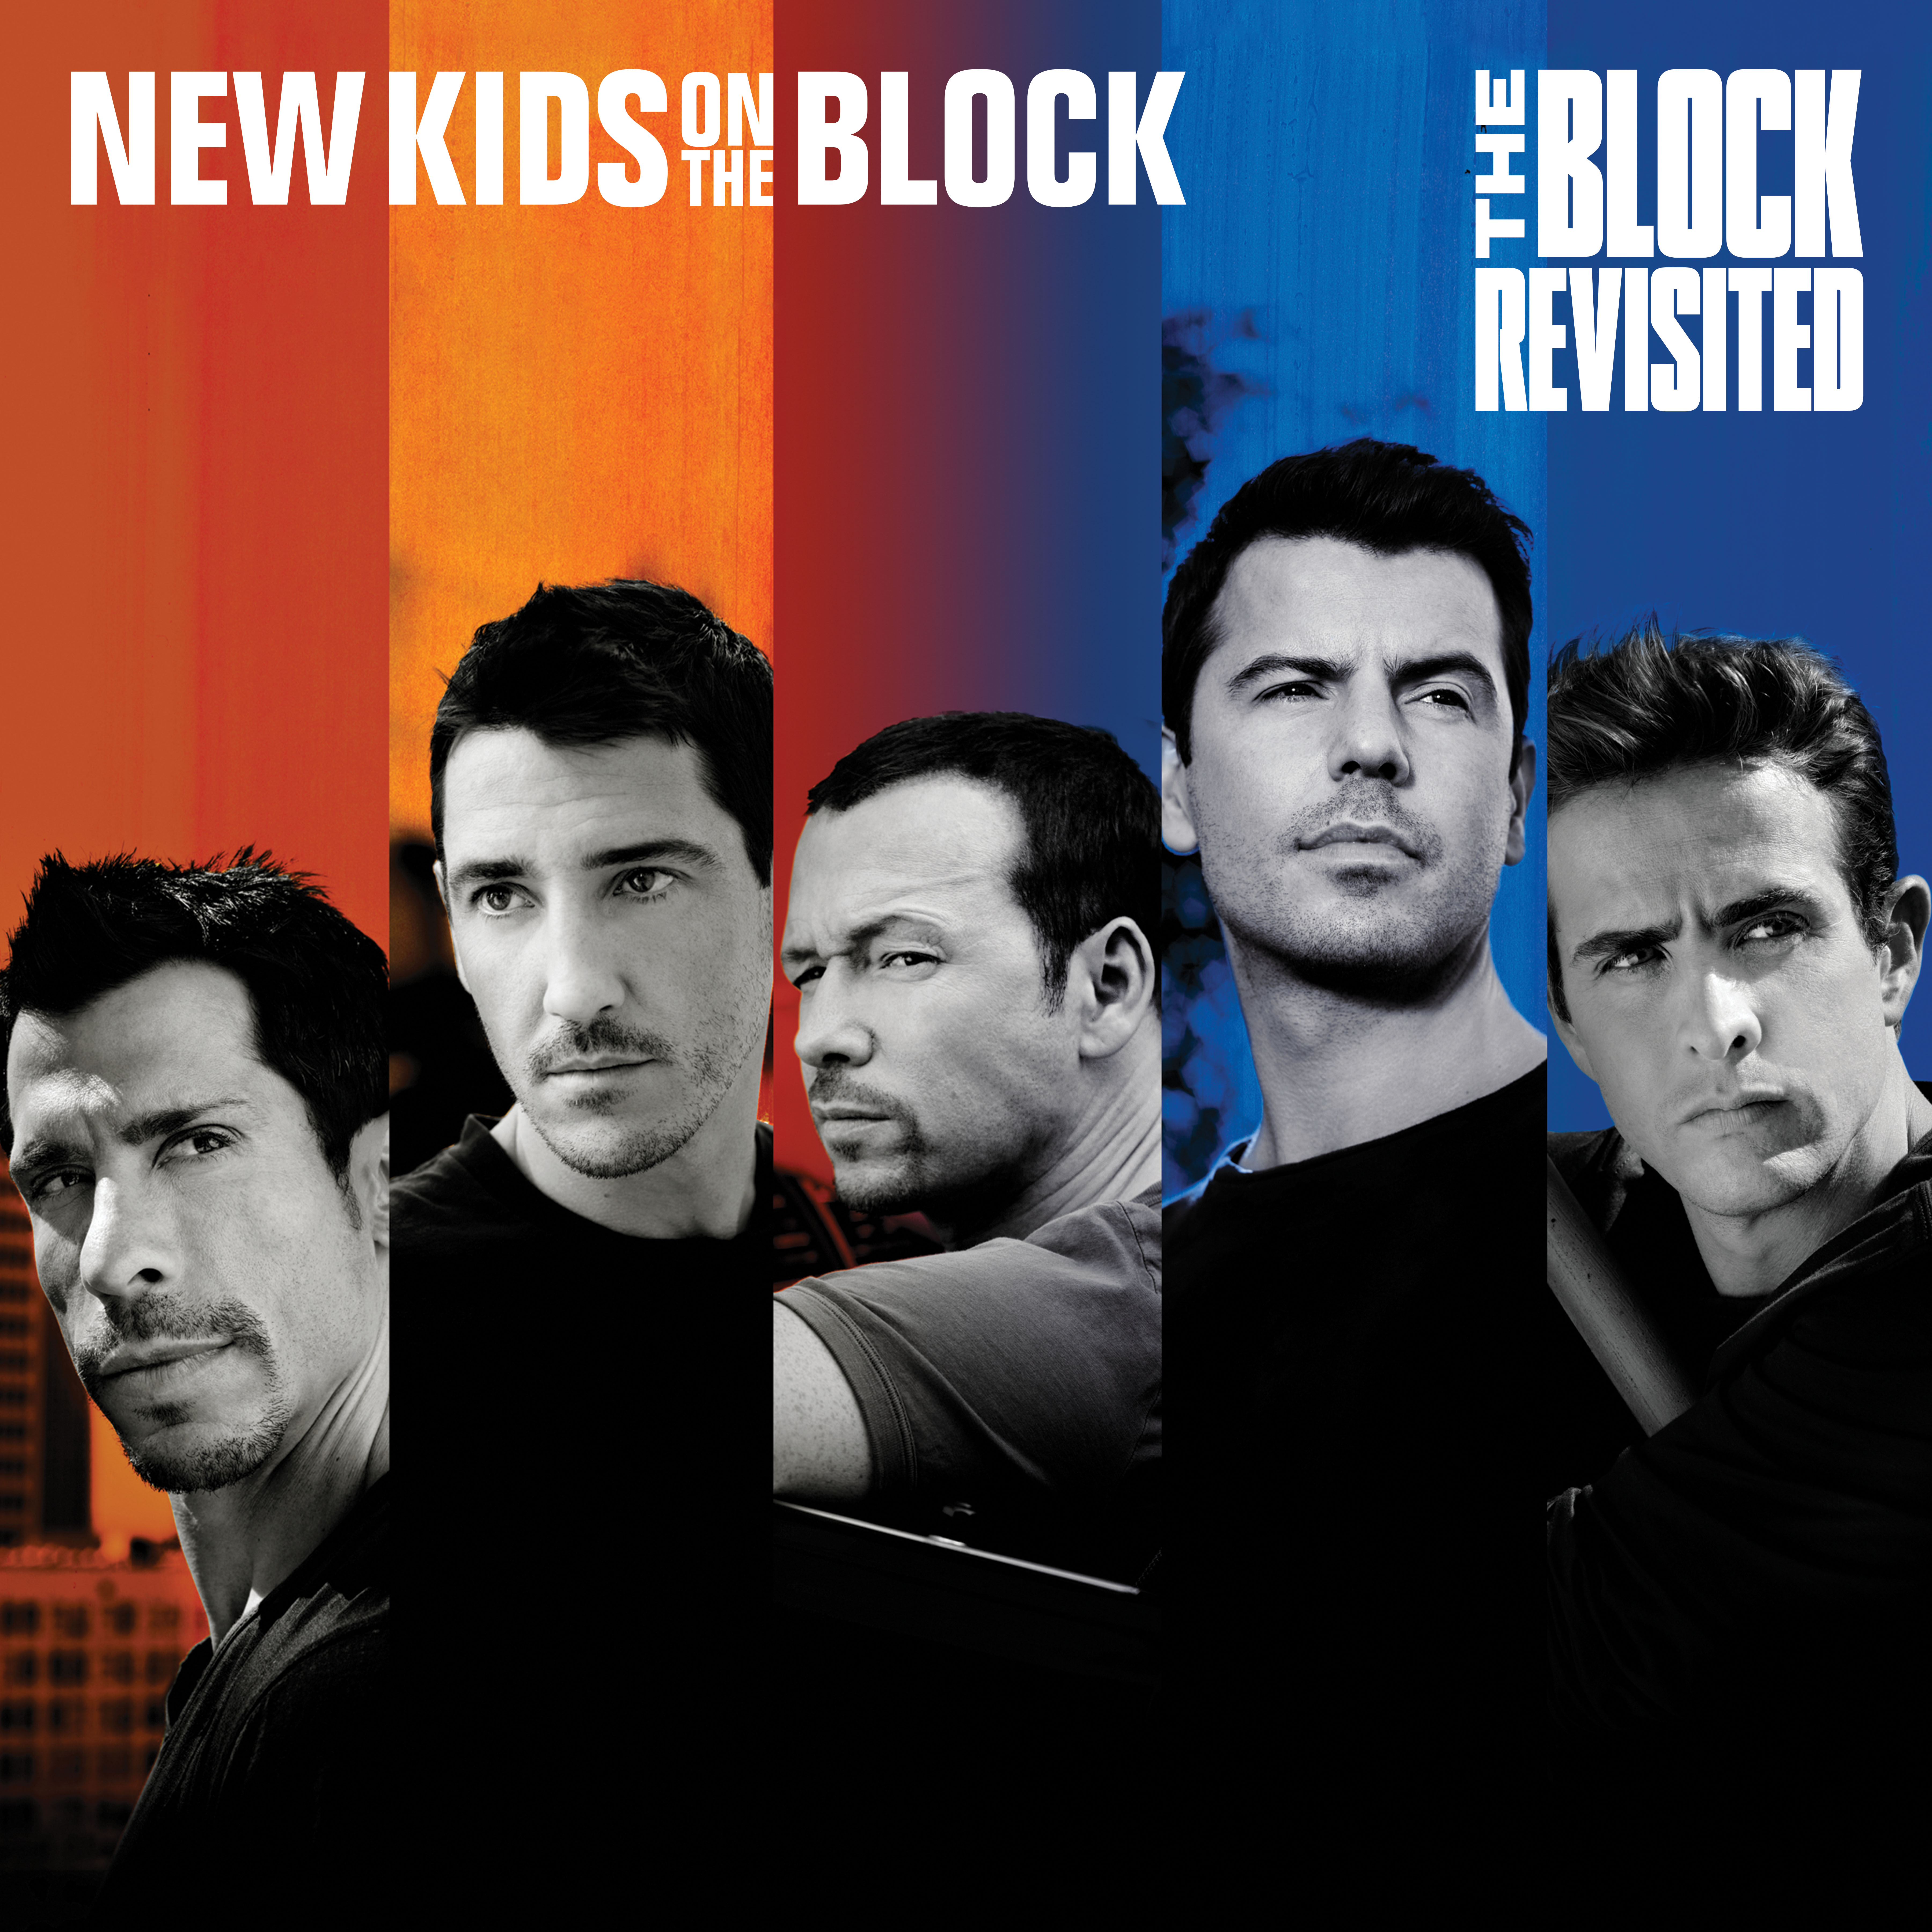 CD Shop - NEW KIDS ON THE BLOCK THE BLOCK REVISITED